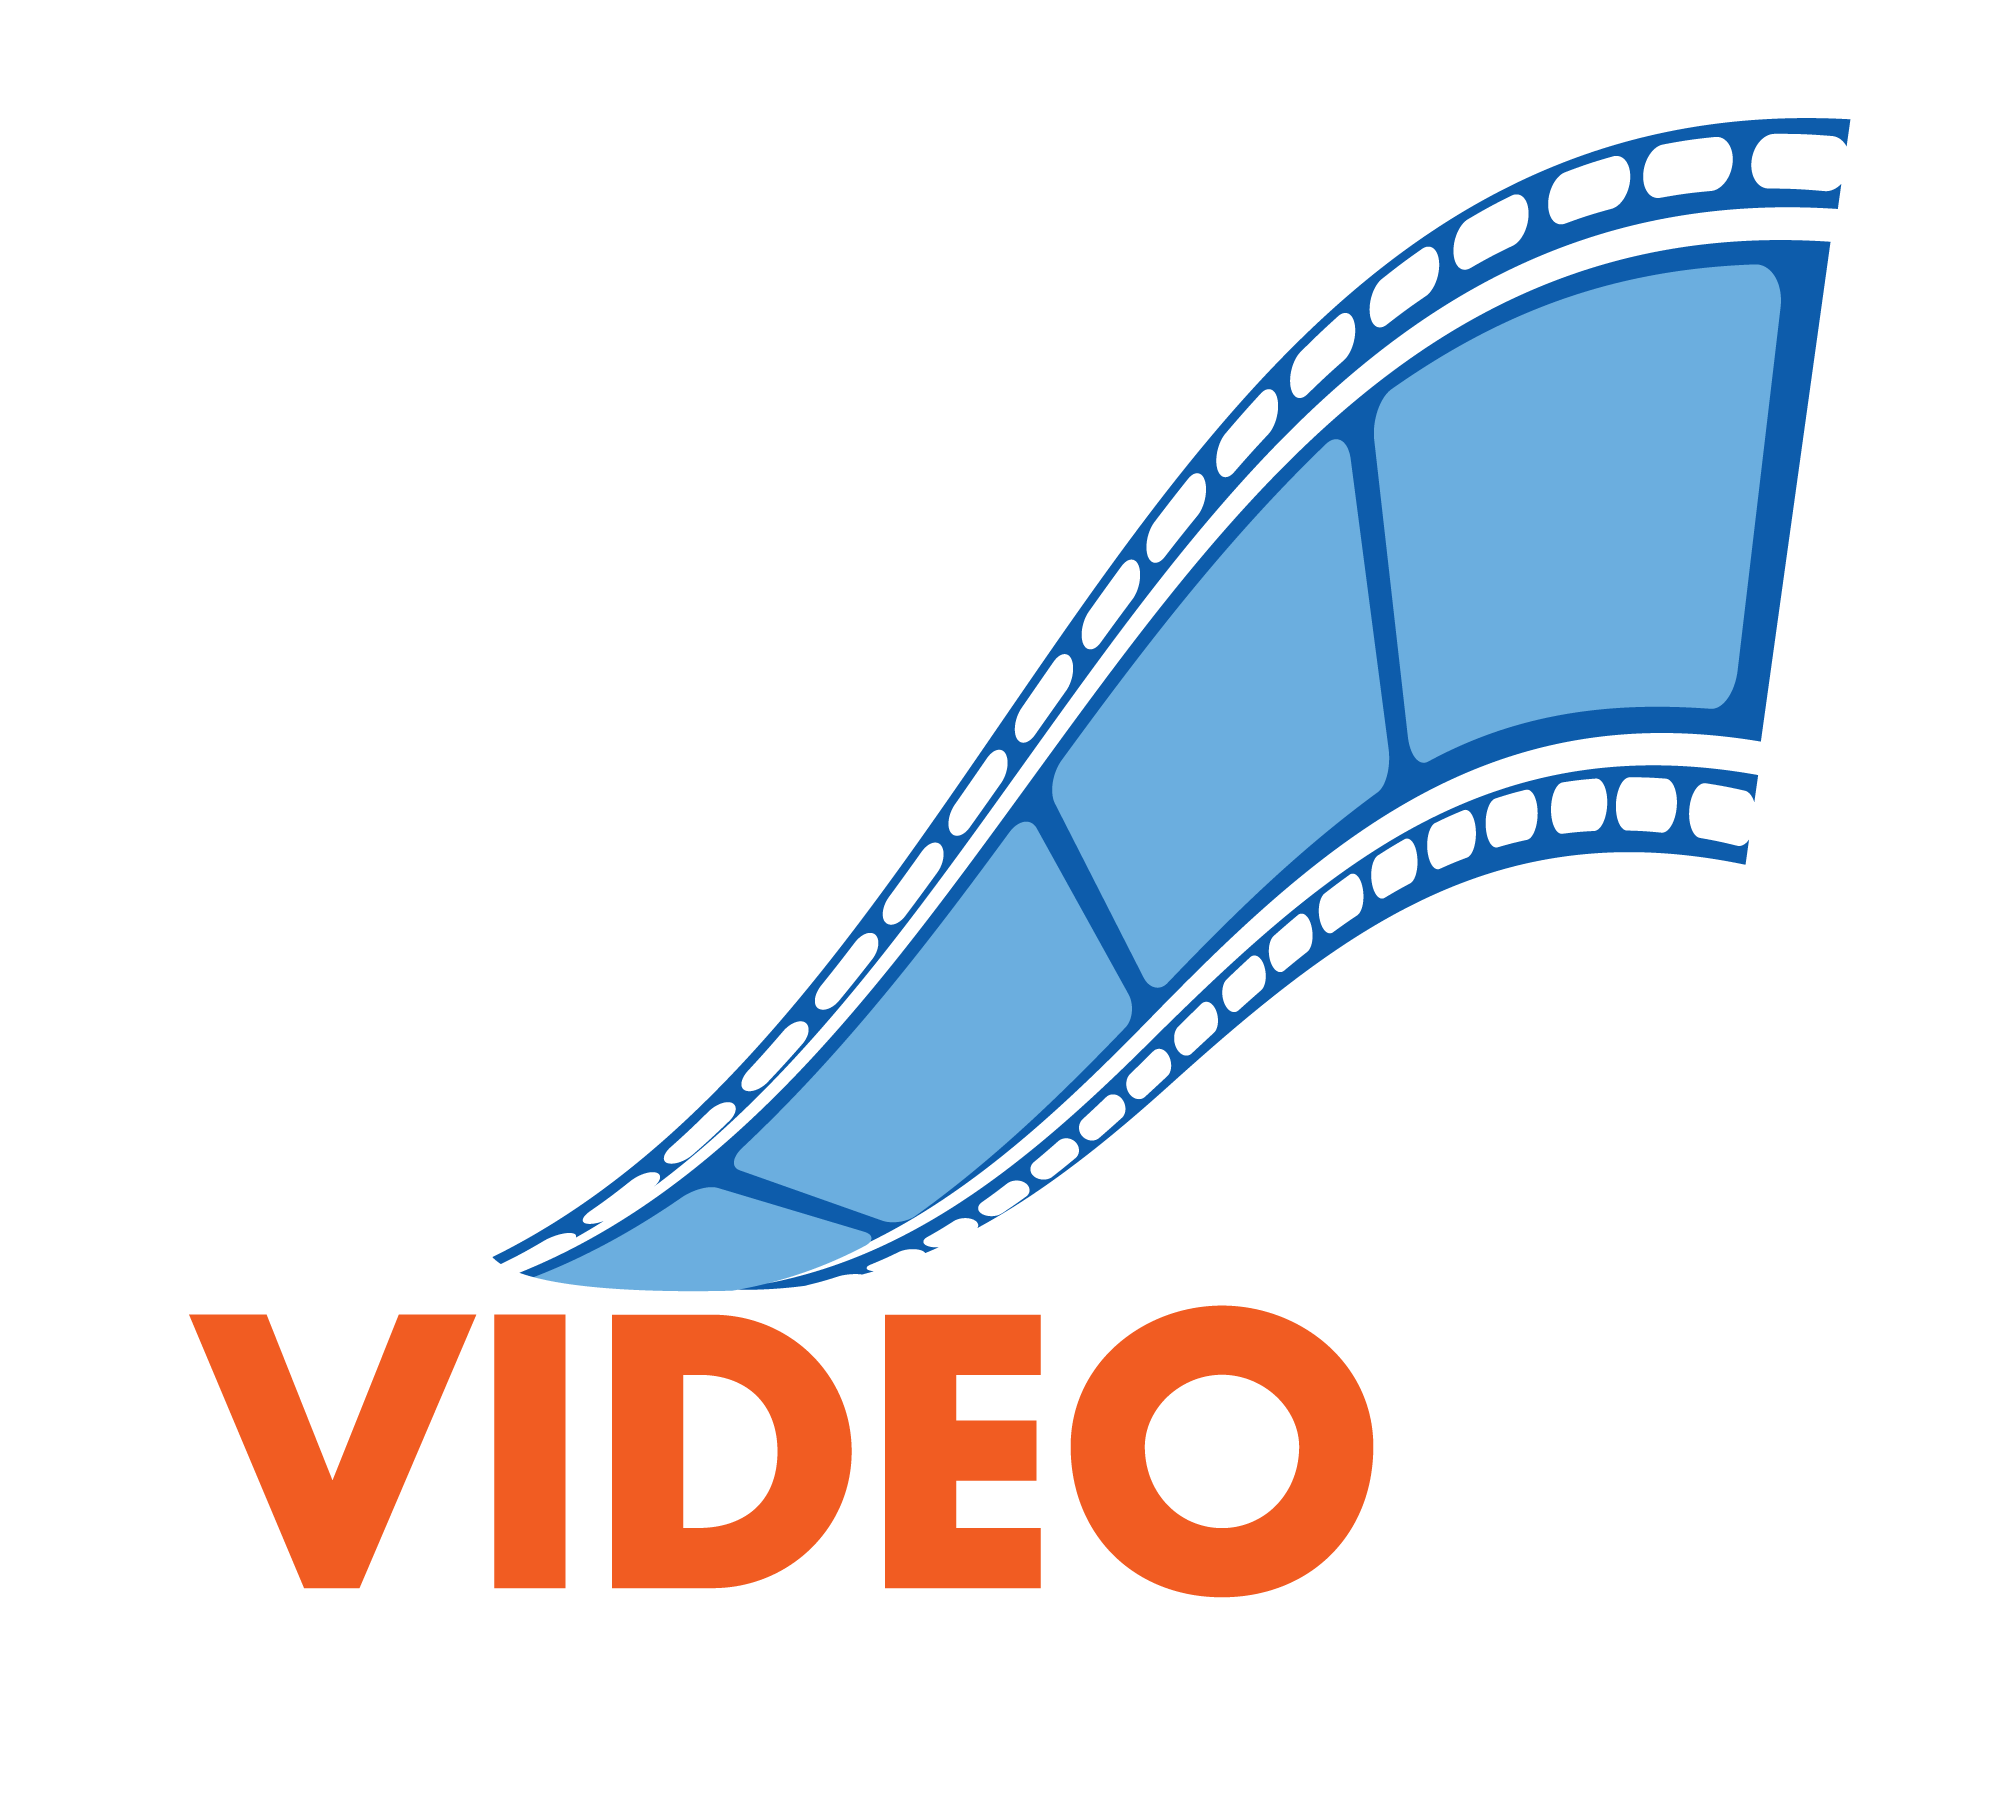 Why You Should Implement Video Marketing In Your Online Marketing